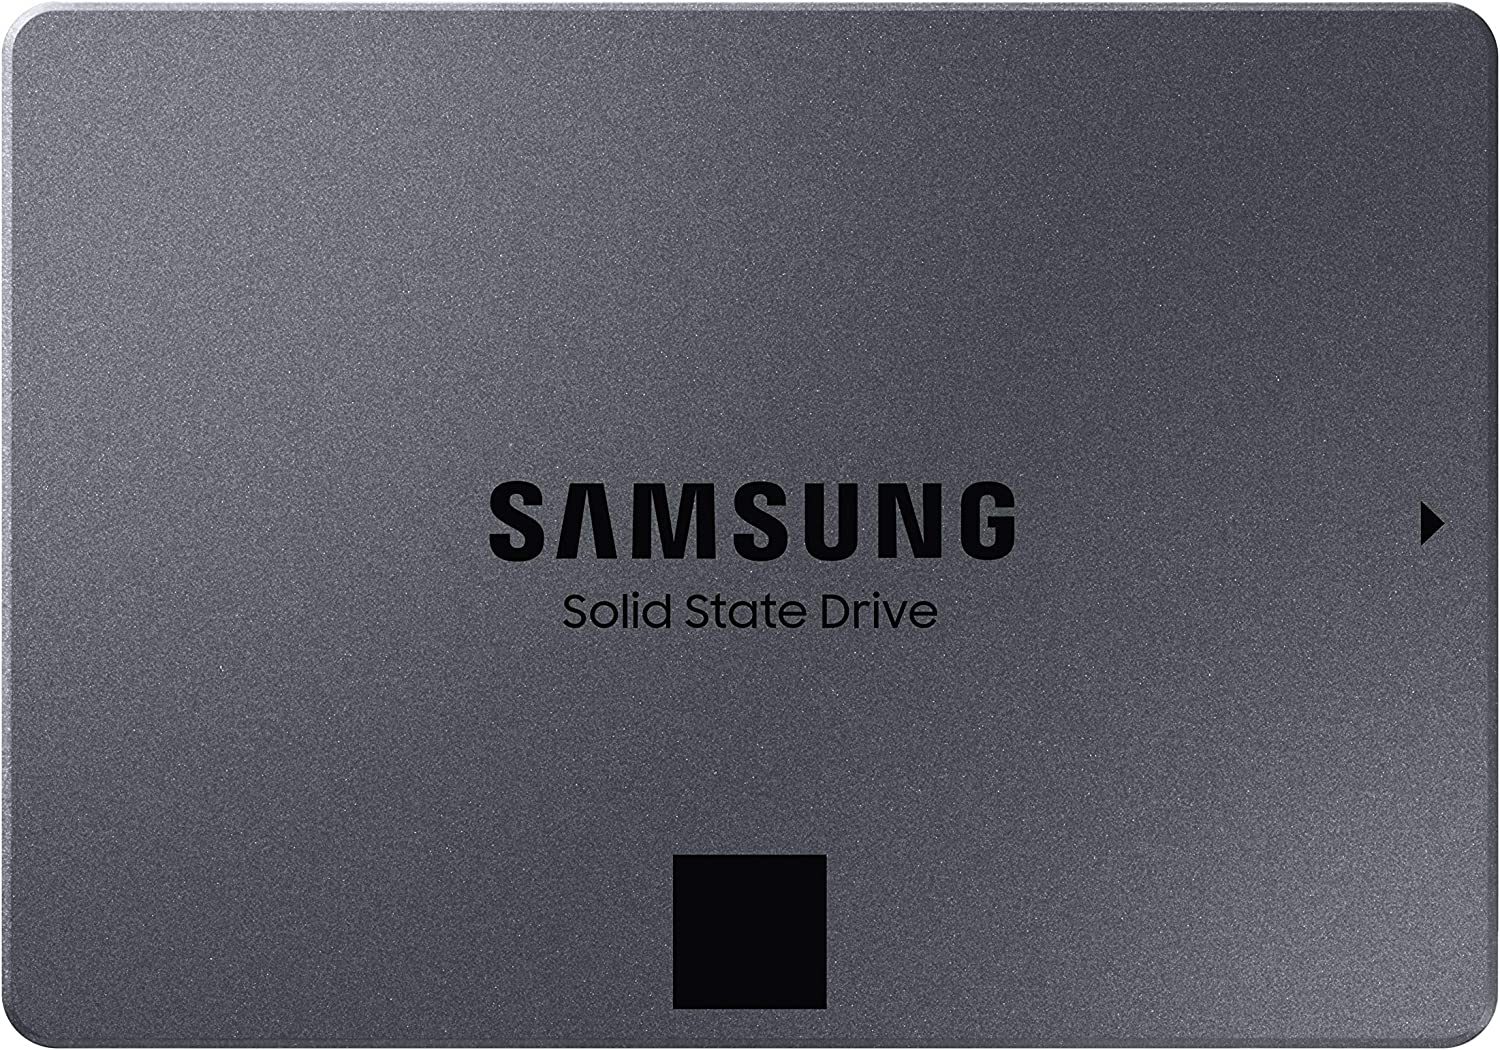 SAMSUNG 870 QVO SATA III 2.5” SSD 2TB Internal Solid State Hard Drive, Upgrade Desktop PC or Laptop Memory and Storage for IT Pros, Creators, Everyday Users, MZ-77Q2T0B $140